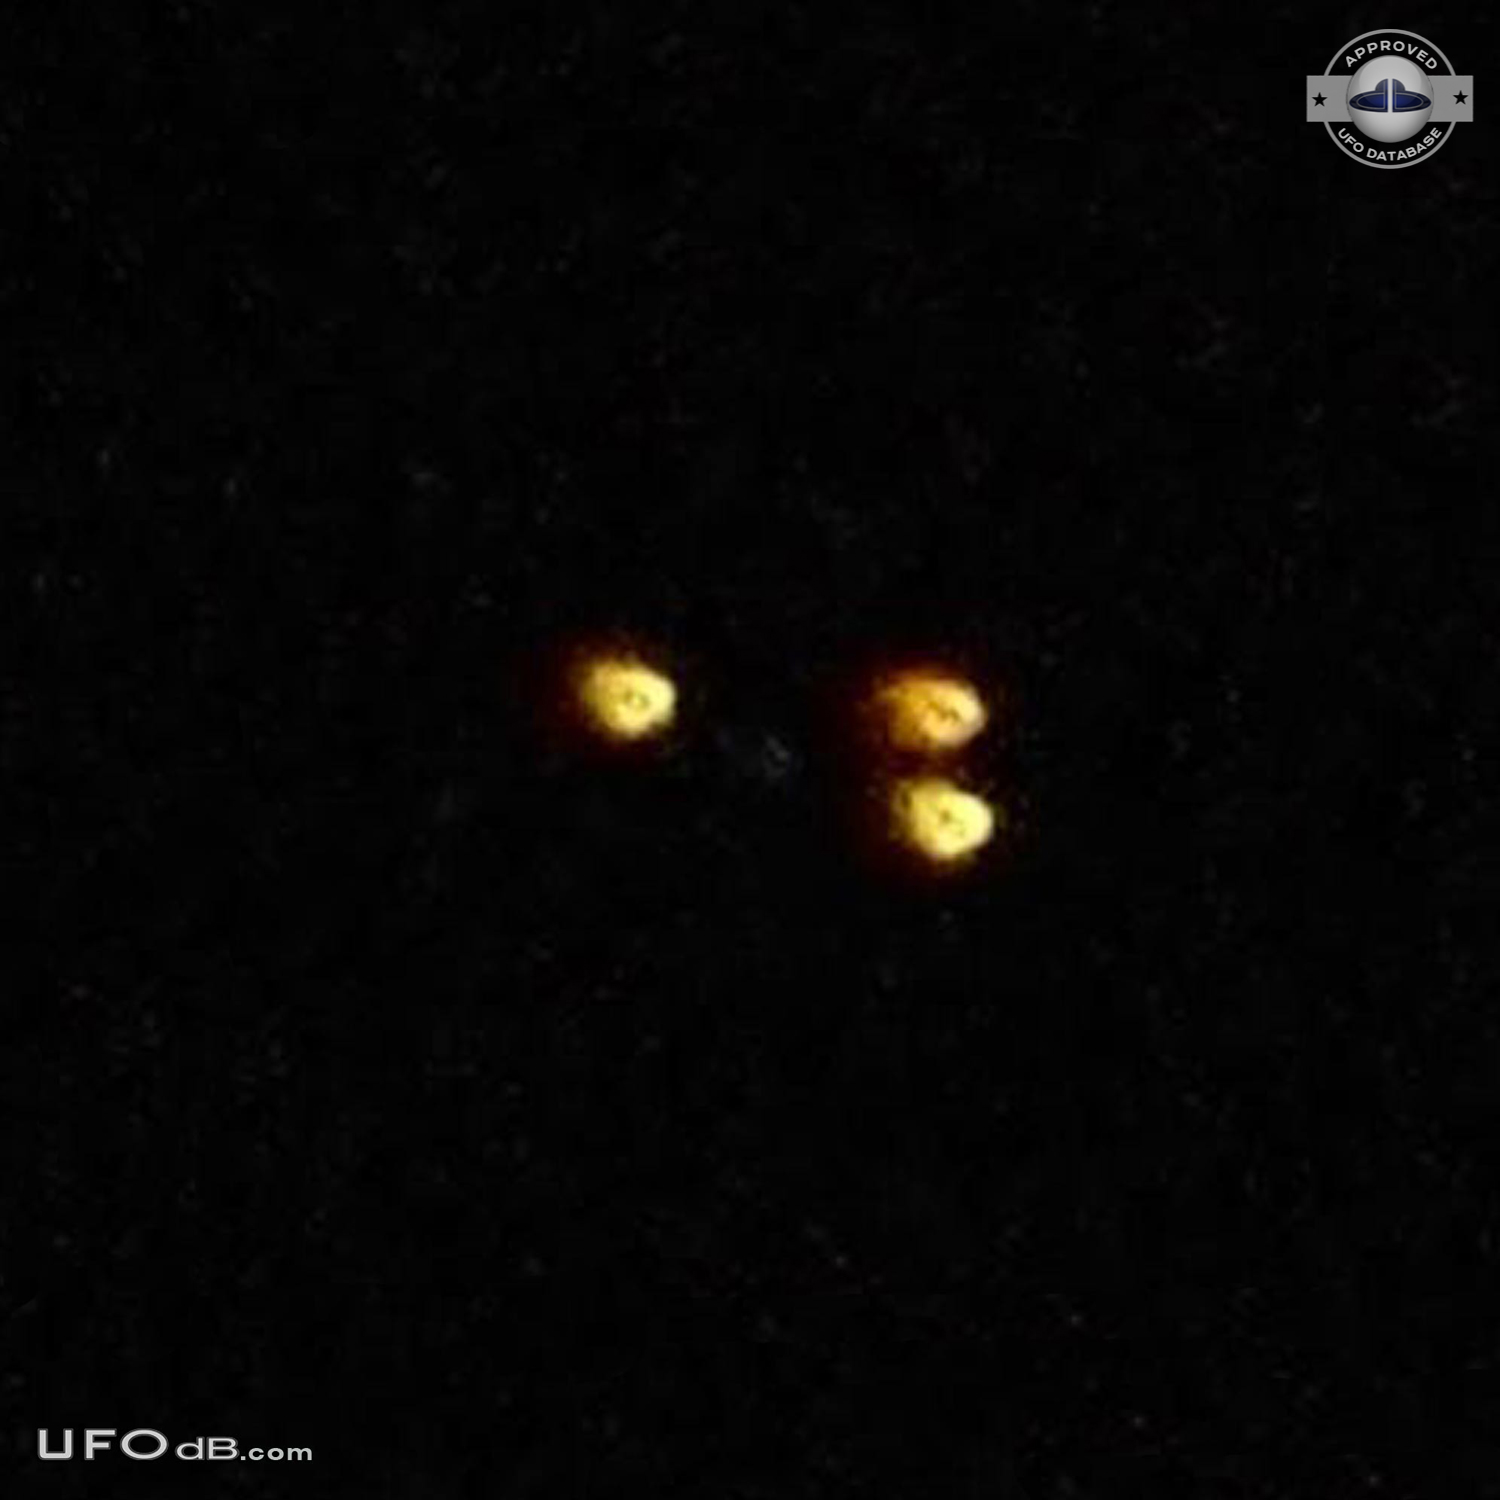 UFO picture with 3 firebals in a triangular formation - Argentina 2011 UFO Picture #408-1